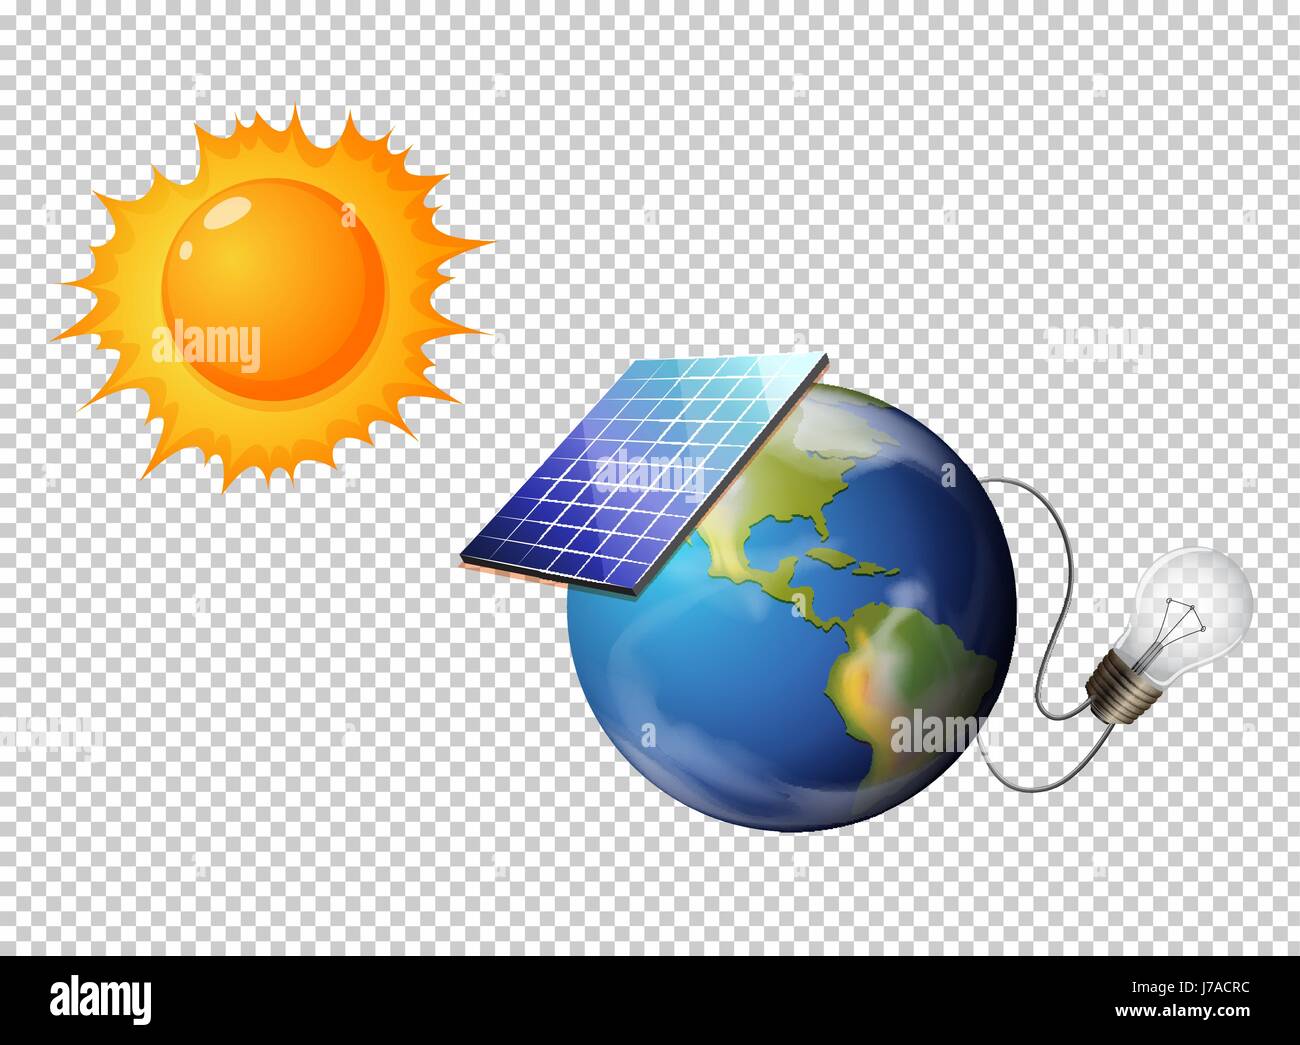 Diagram showing sun and solar cell on earth illustration Stock Vector